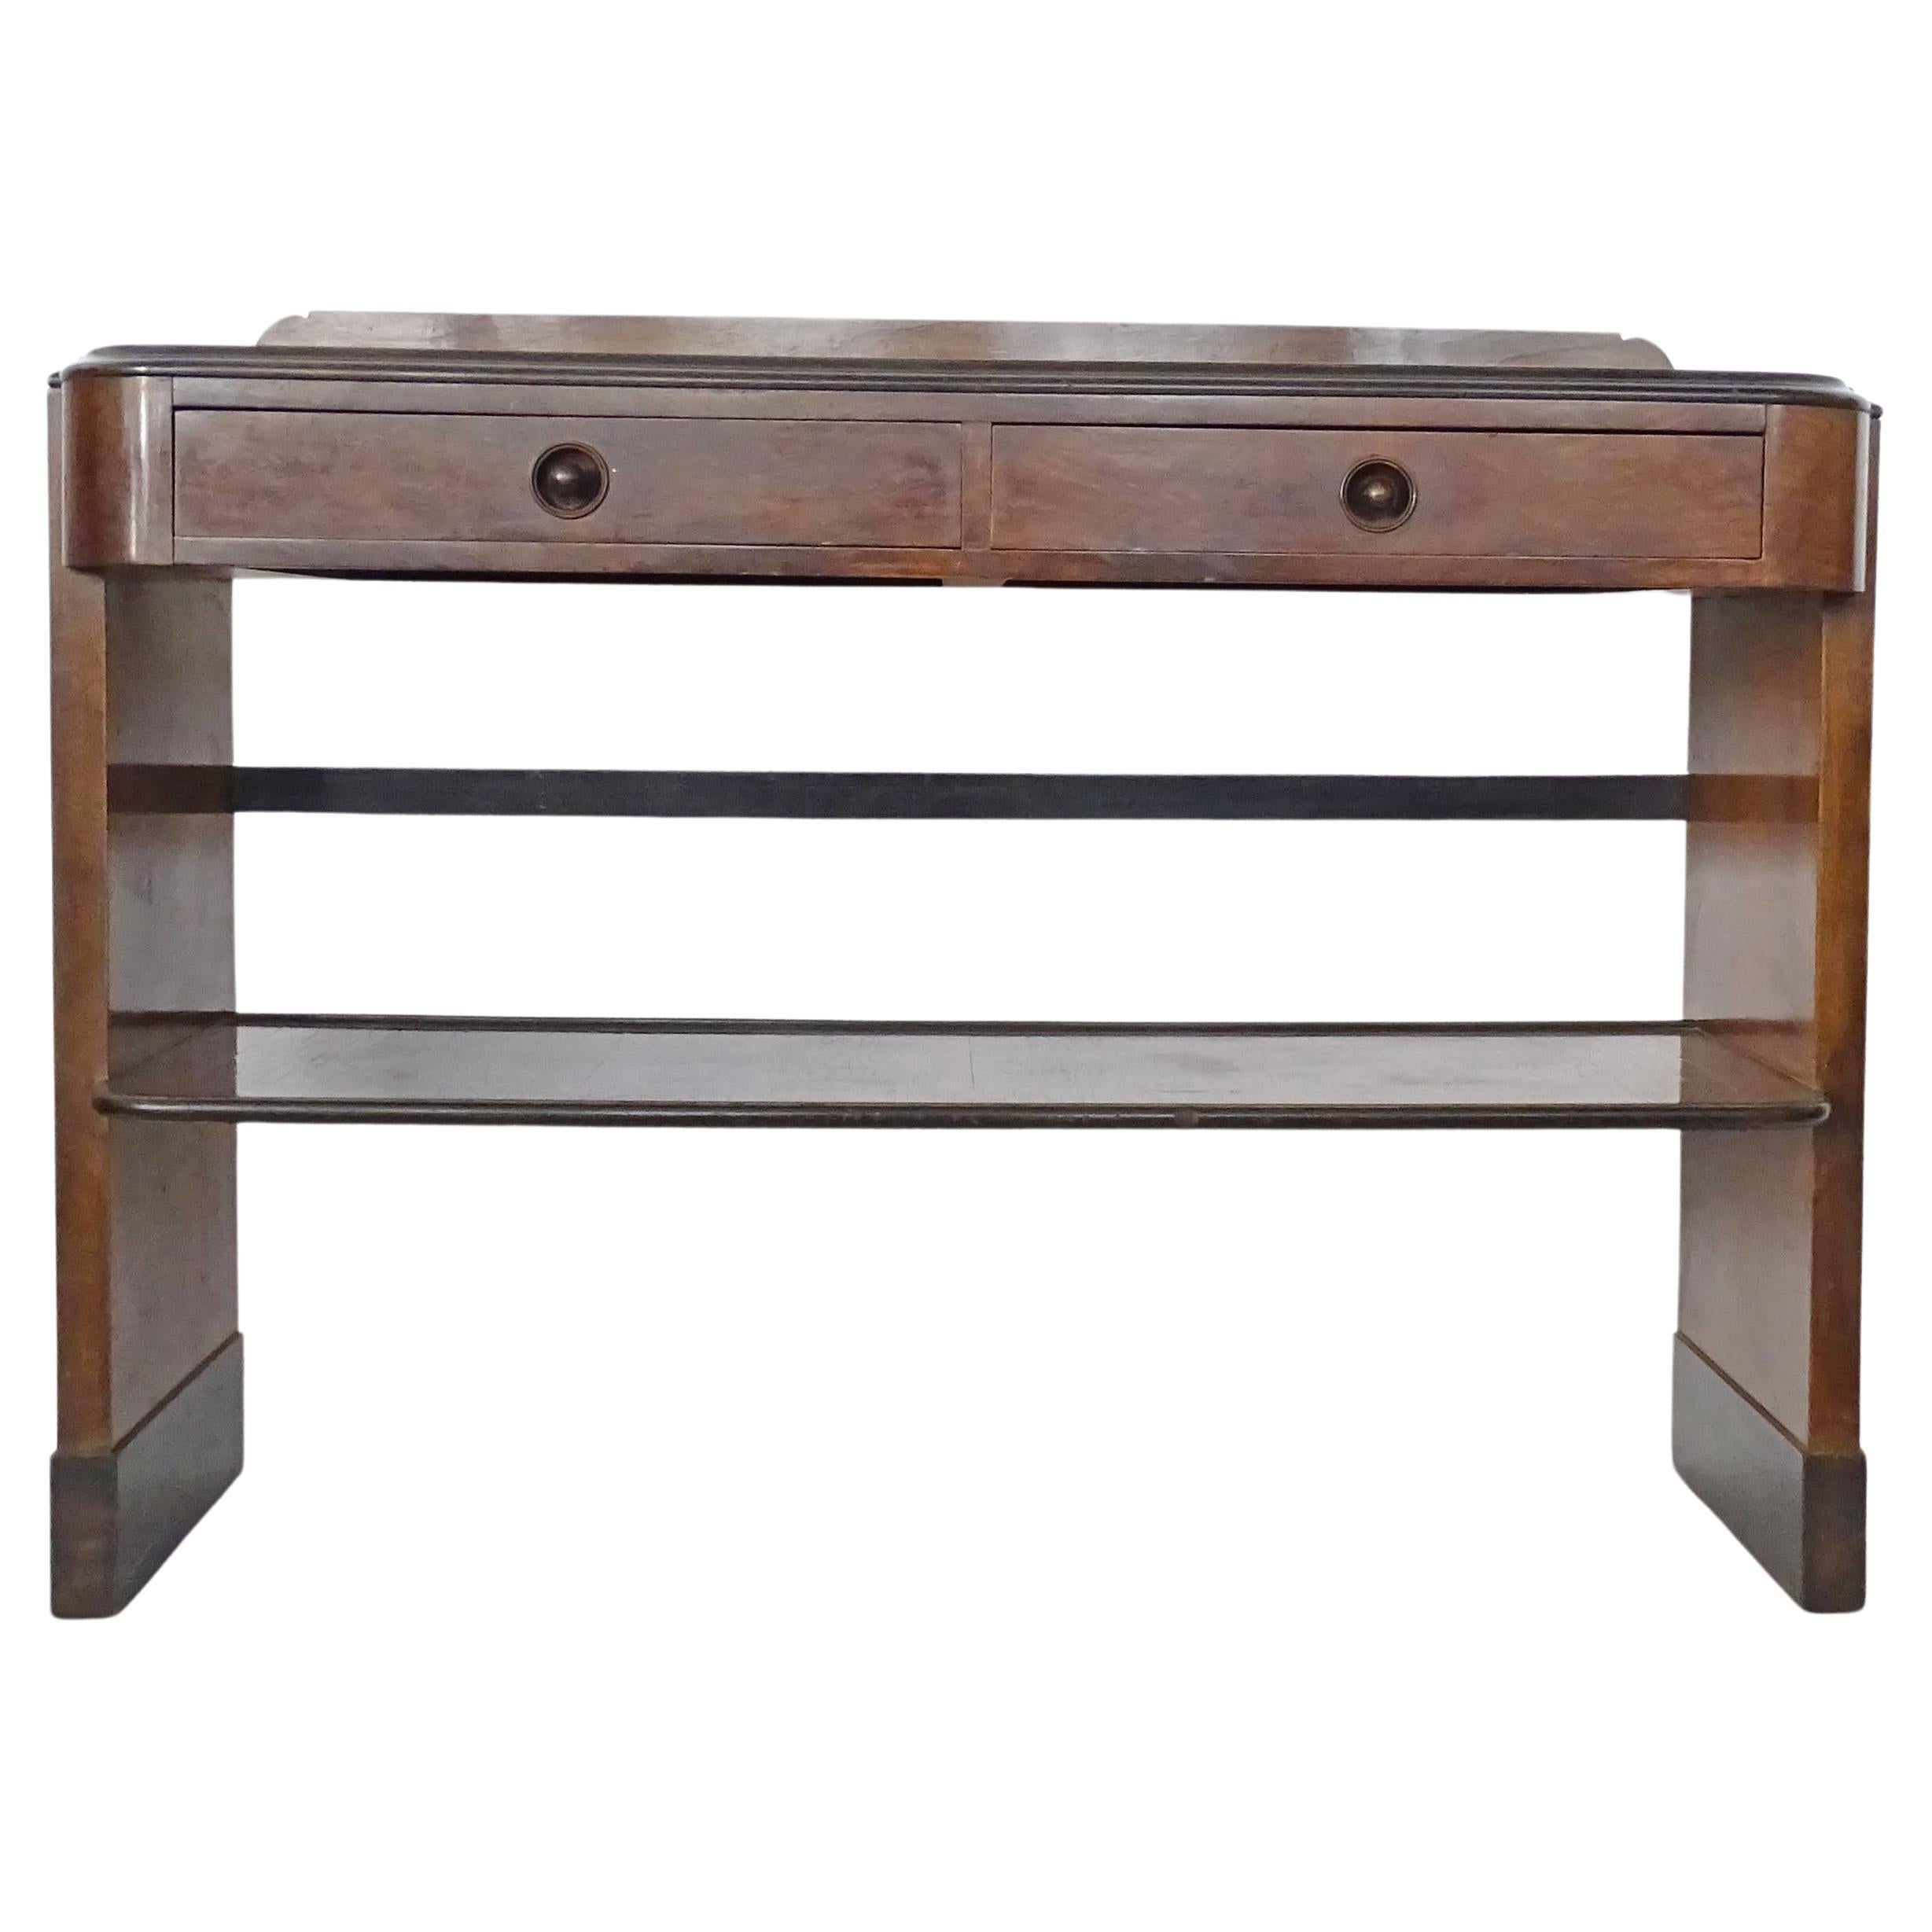 Italian Art Deco freestanding console with two drawers and lower shelf.